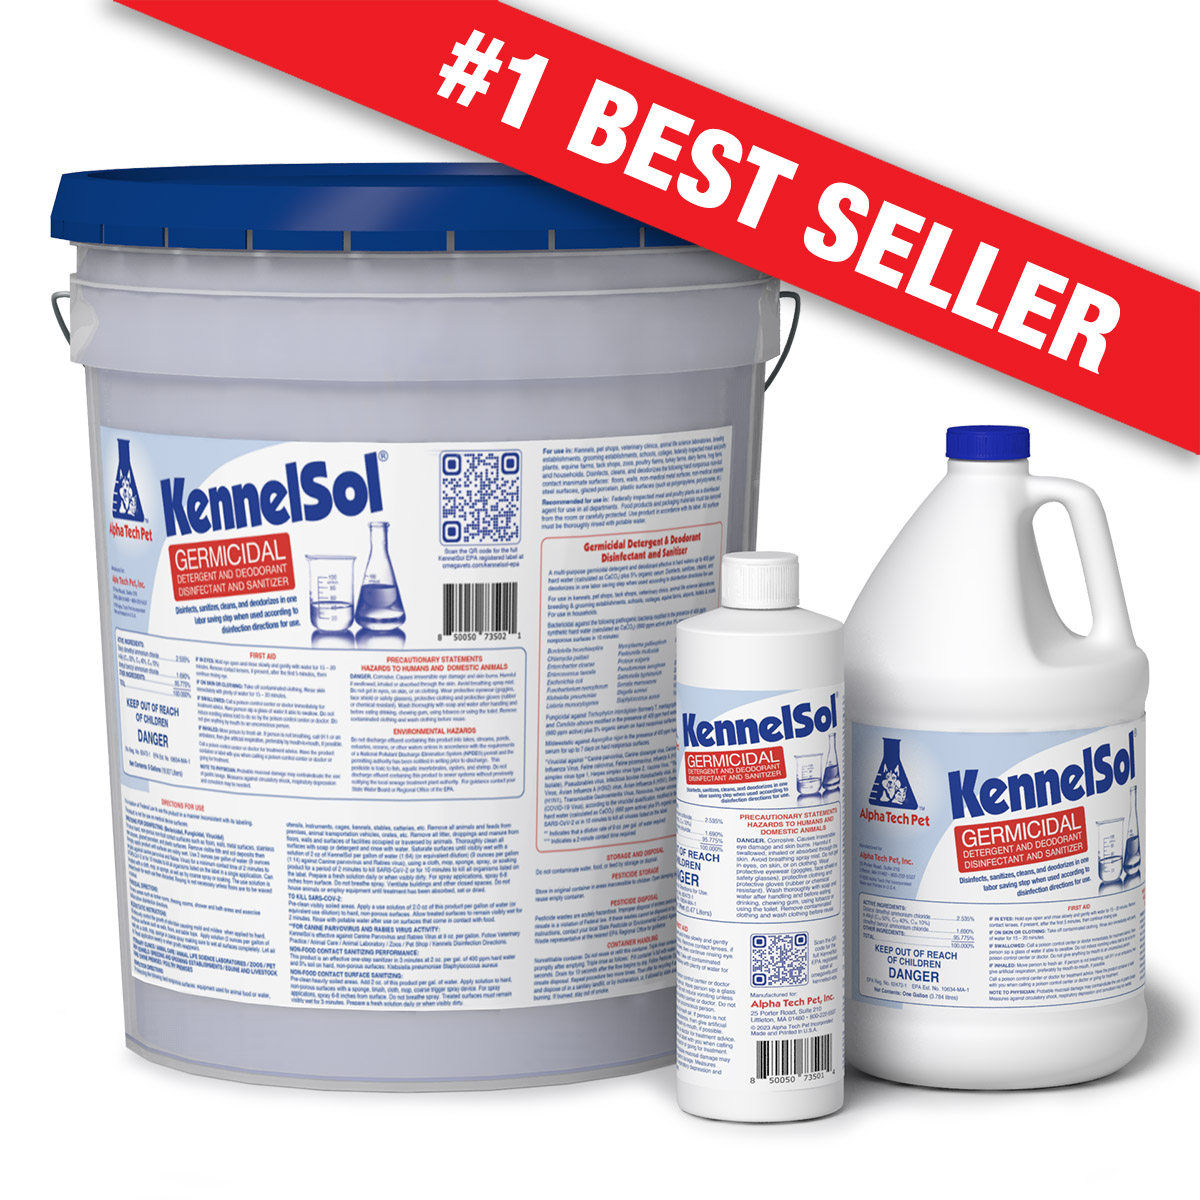 http://www.alphatechpet.com/Shared/Images/Product/KennelSol-Germicidal-Cleaner-Disinfectant-Pint-1-5-15-Gallon/kennelsol-group-pint-gallon-5-gal.jpg